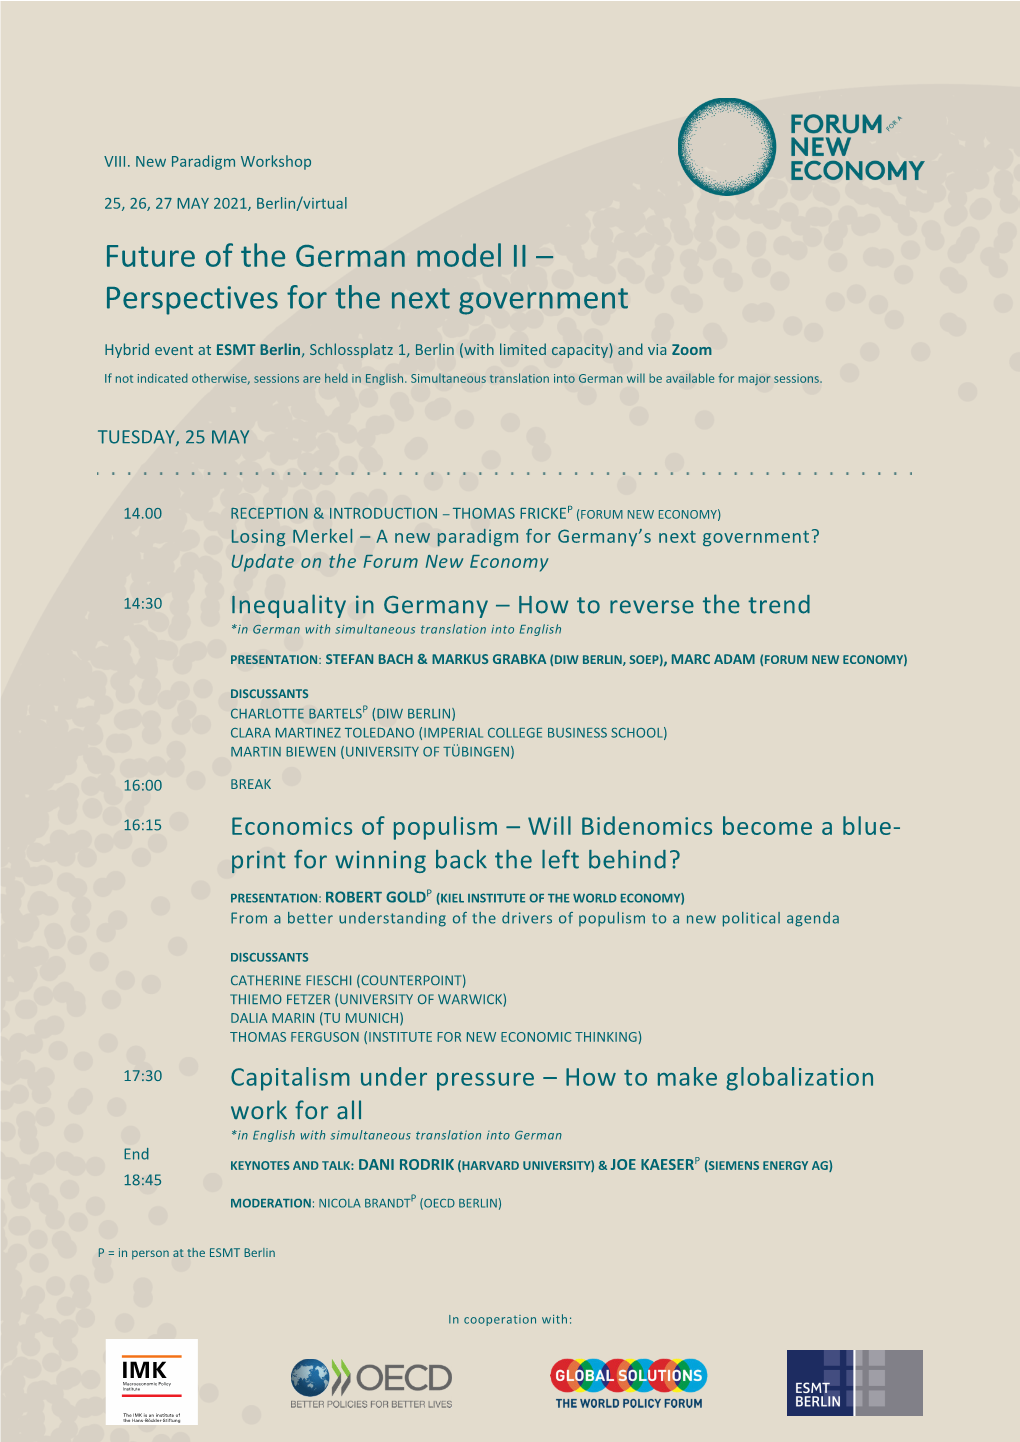 Future of the German Model II – Perspectives for the Next Government